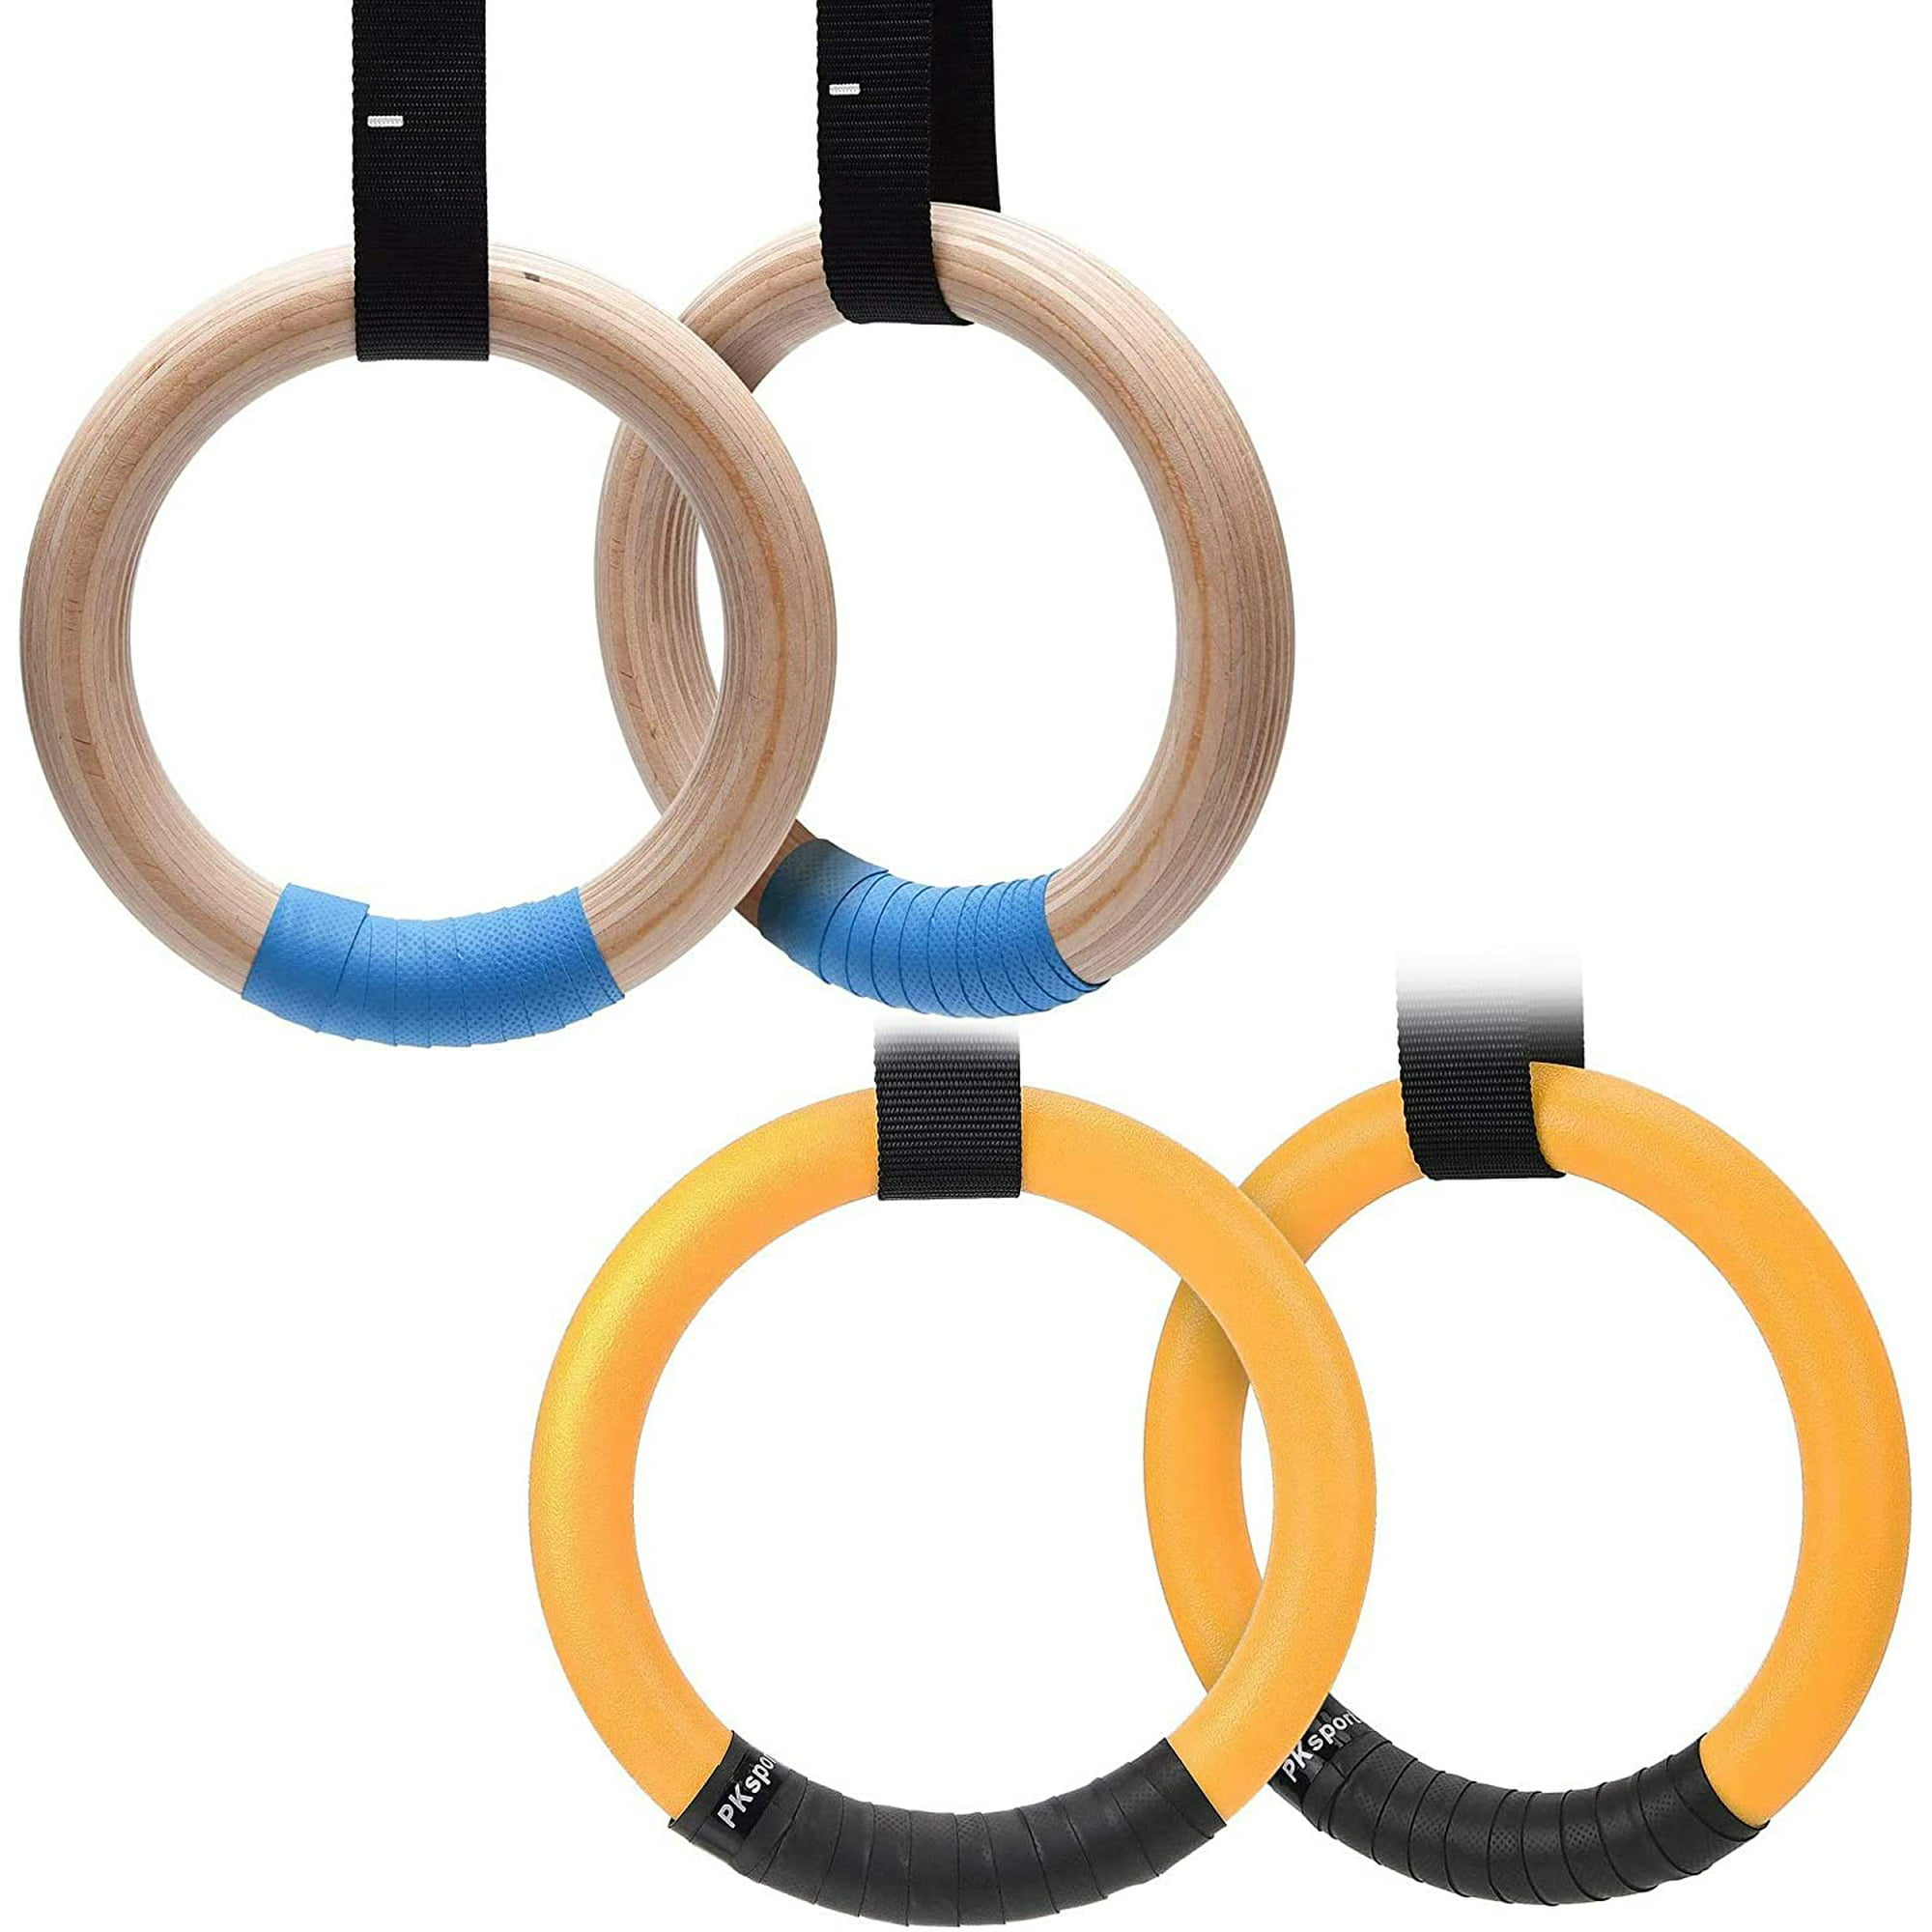 PACEARTH A Pair of Wood Gymnastics Rings + A Pair of Gymnastic Rings (Yellow) | Walmart Canada